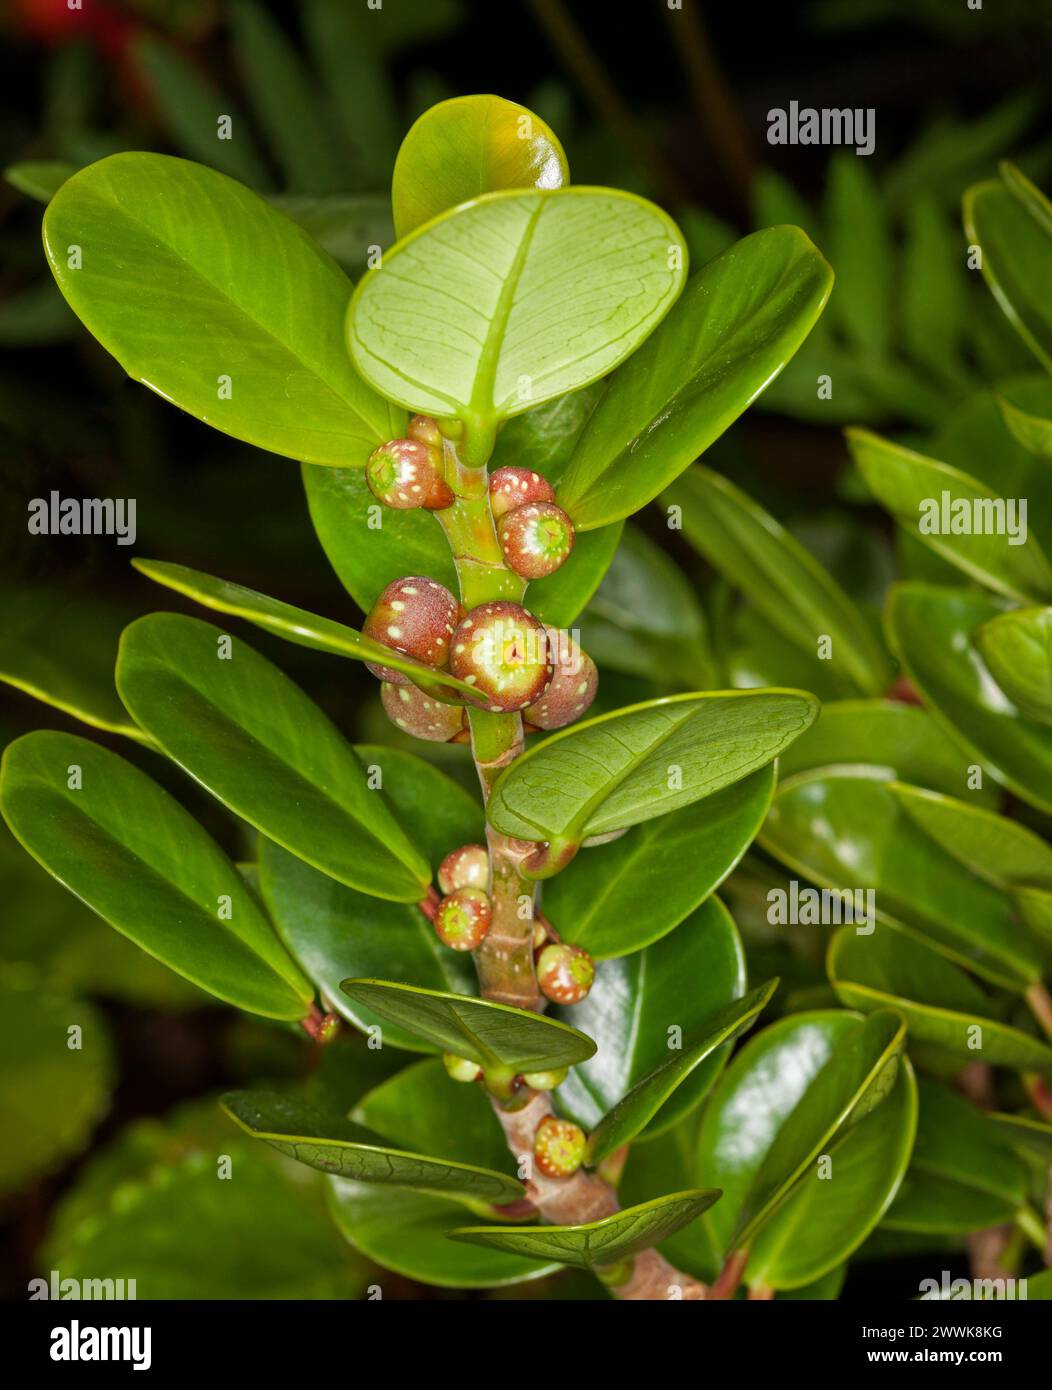 Glossy green leaves and small red fruits of Ficus microcarpa, Green Island fig, an Australian native shrub that attracts birds Stock Photo